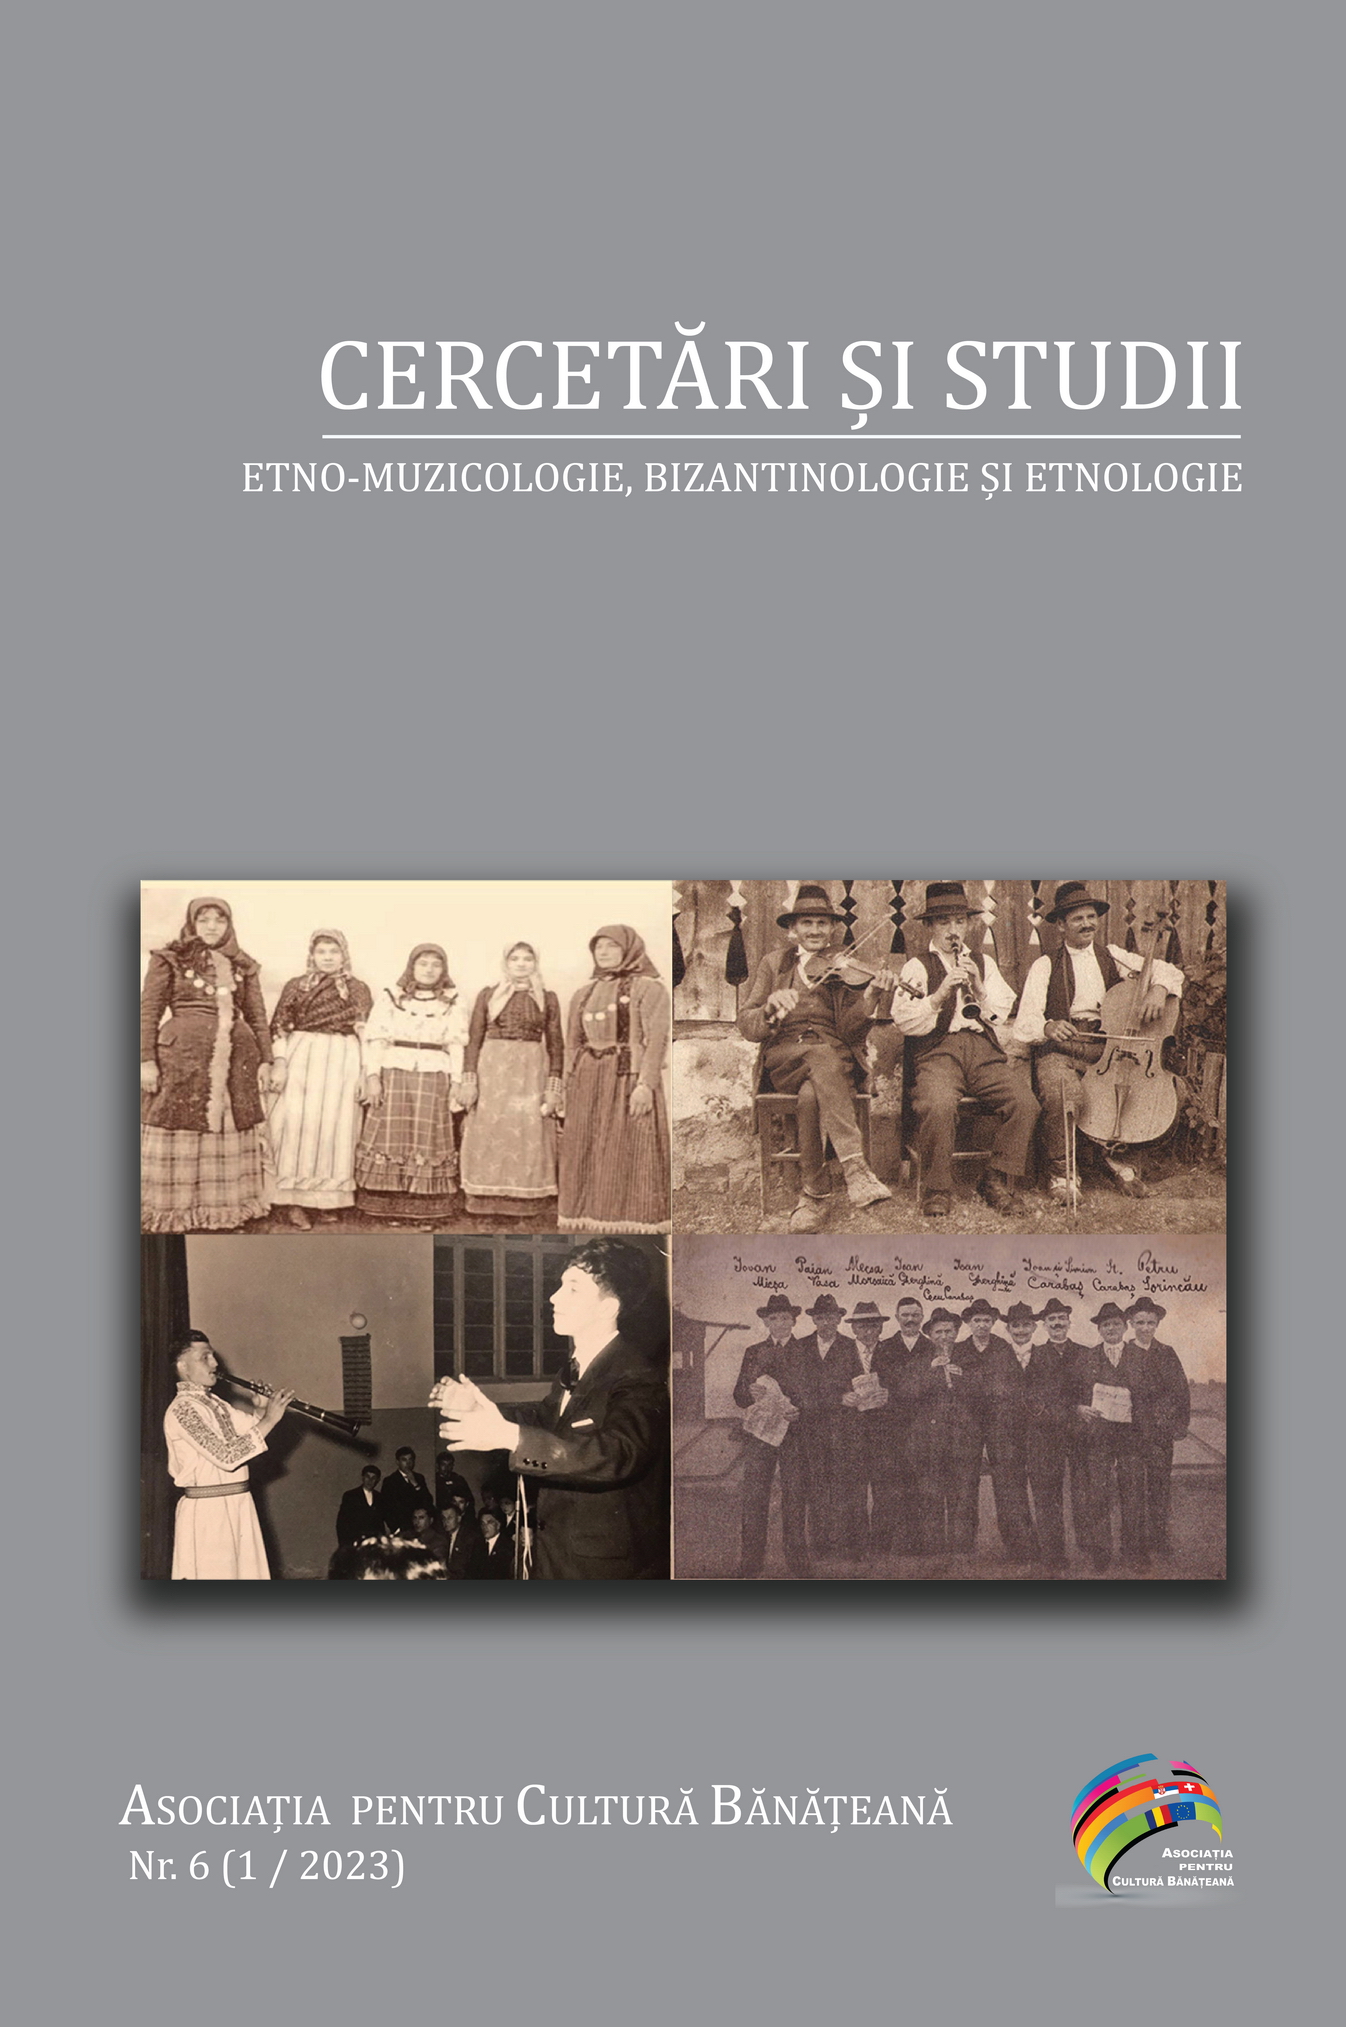 The photographic exhibition "Banatians from past times" Cover Image